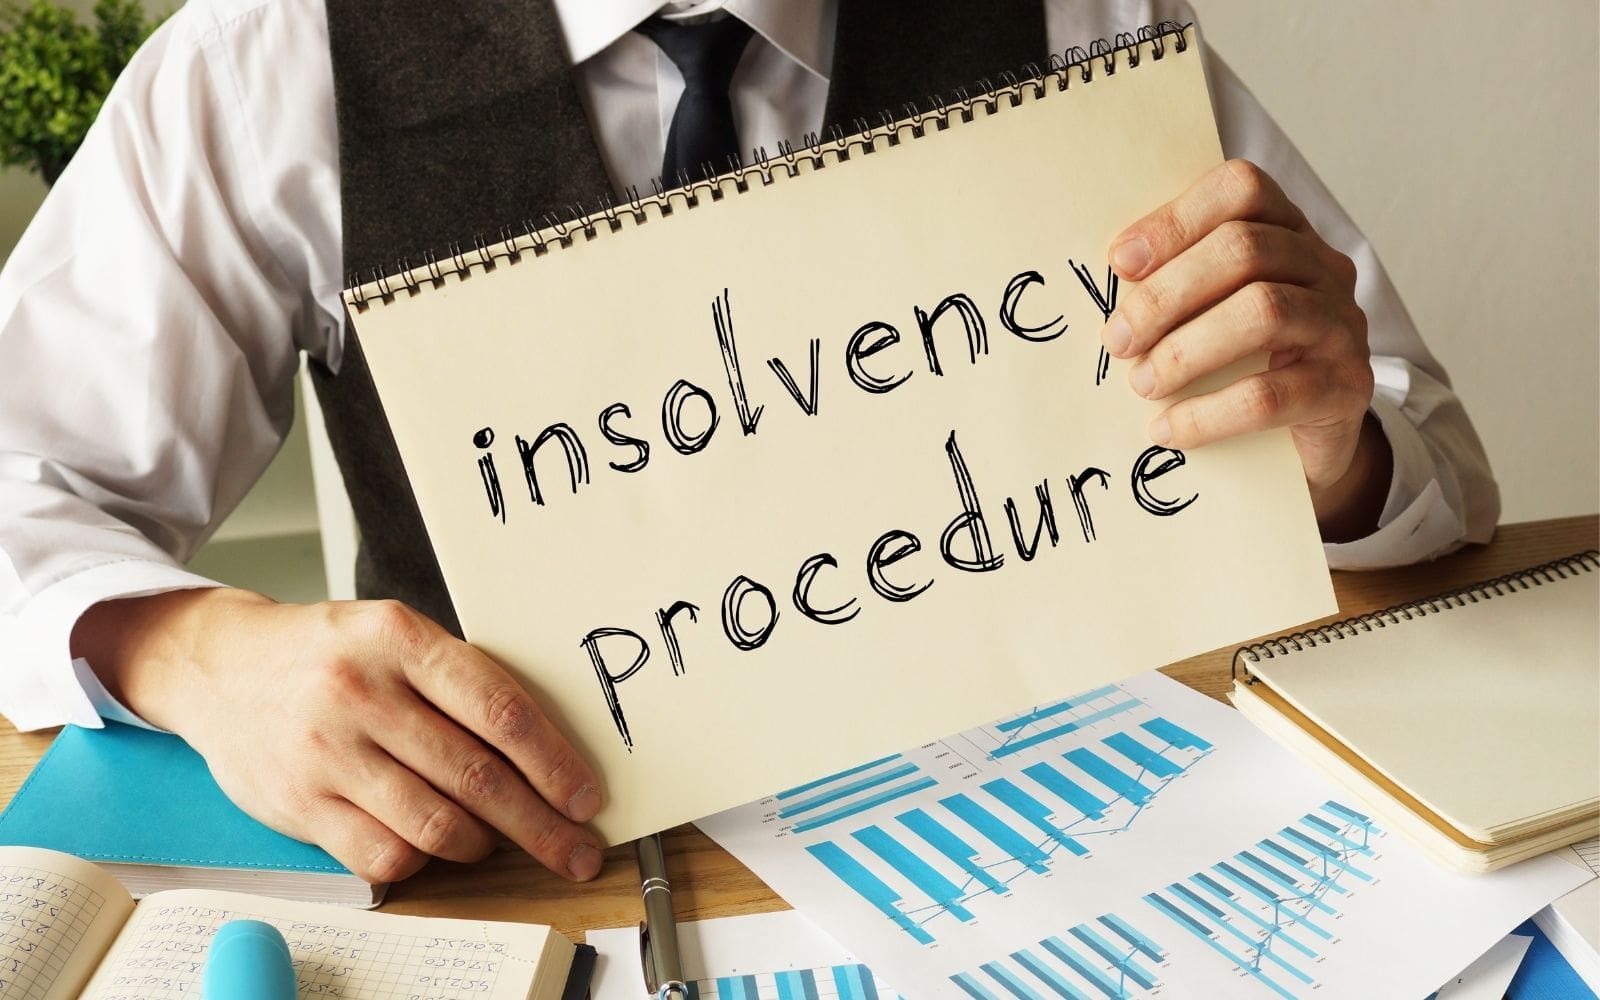 Insolvency Law